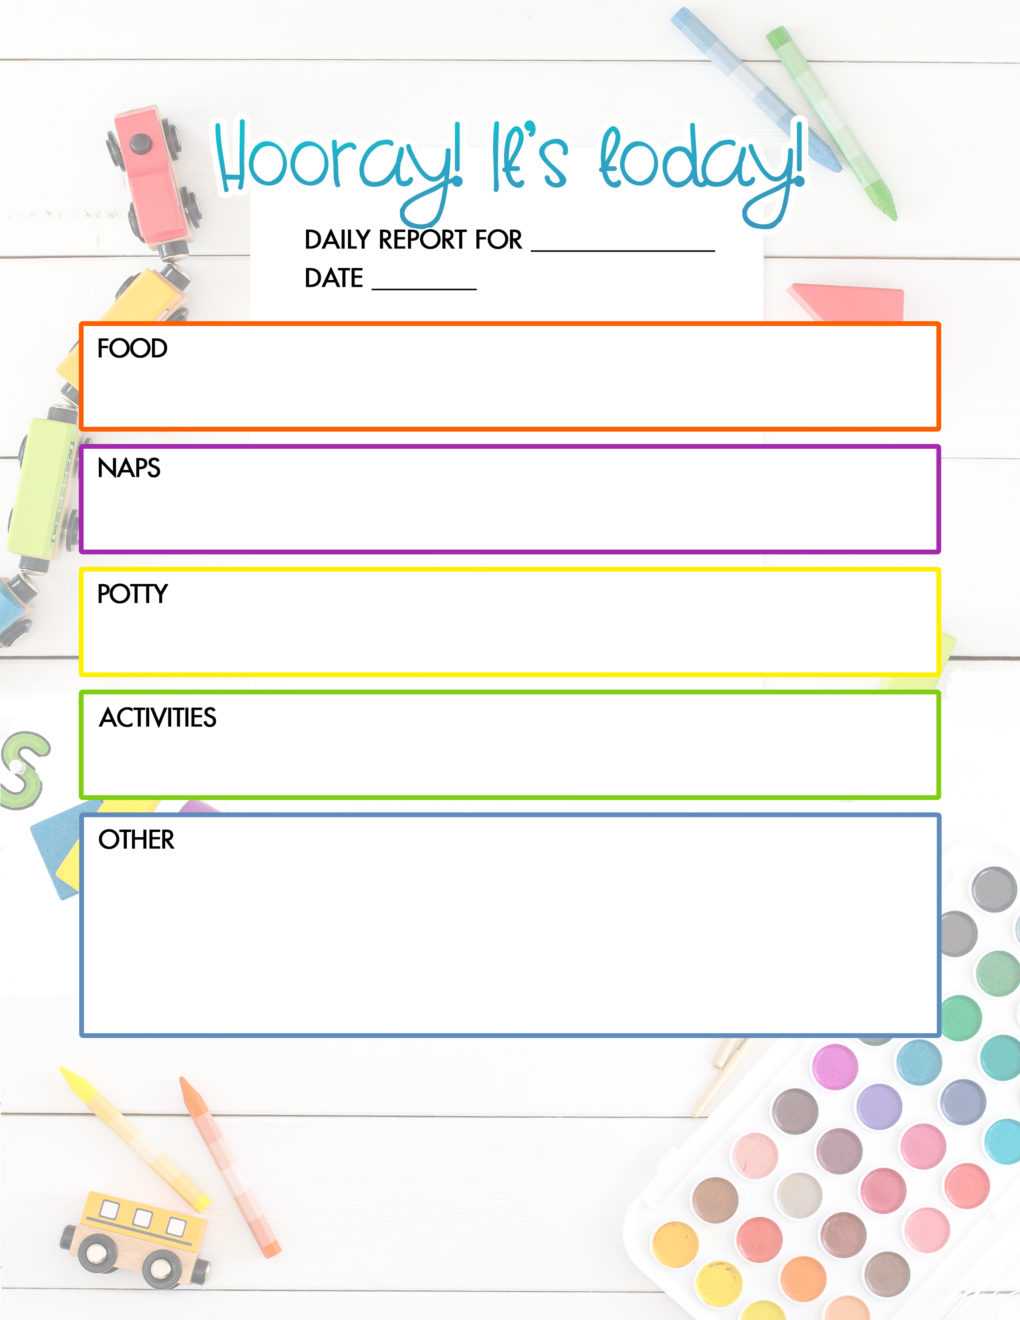 Free Daycare Daily Report | Child Care Printable – The Diy With Daycare Infant Daily Report Template